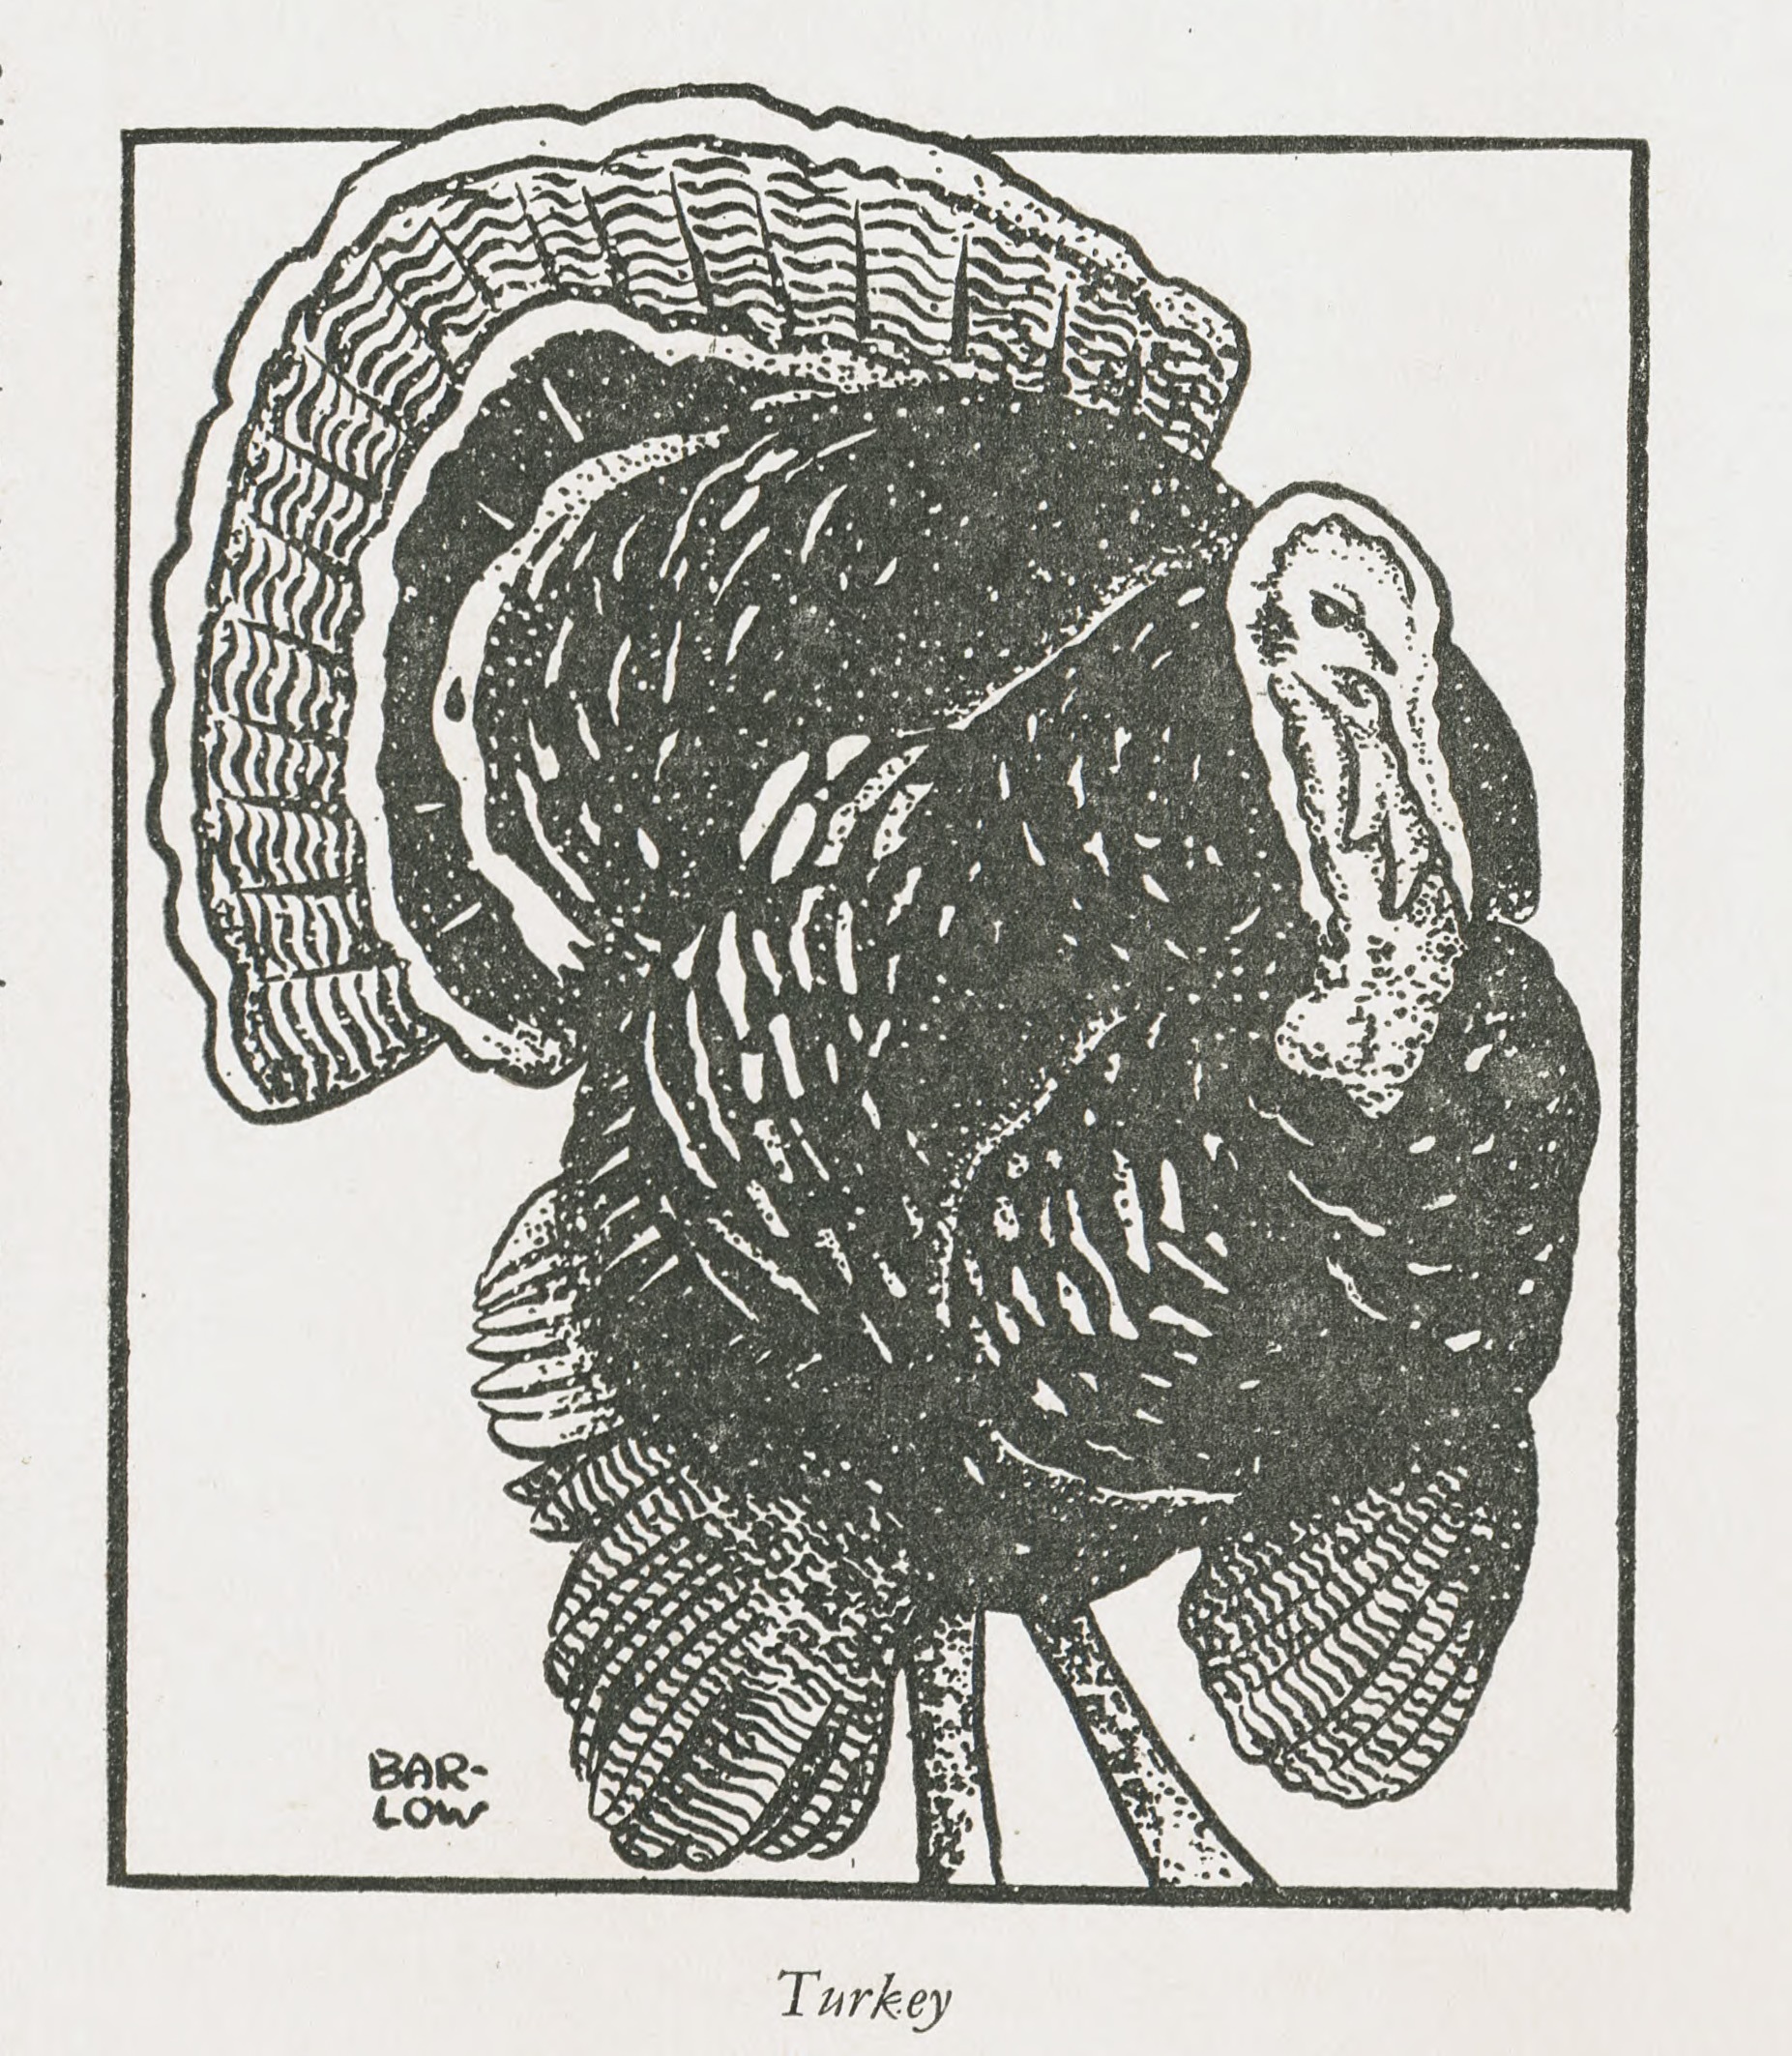 Cartoon of a male turkey from The Animals' Friend, December 1938.